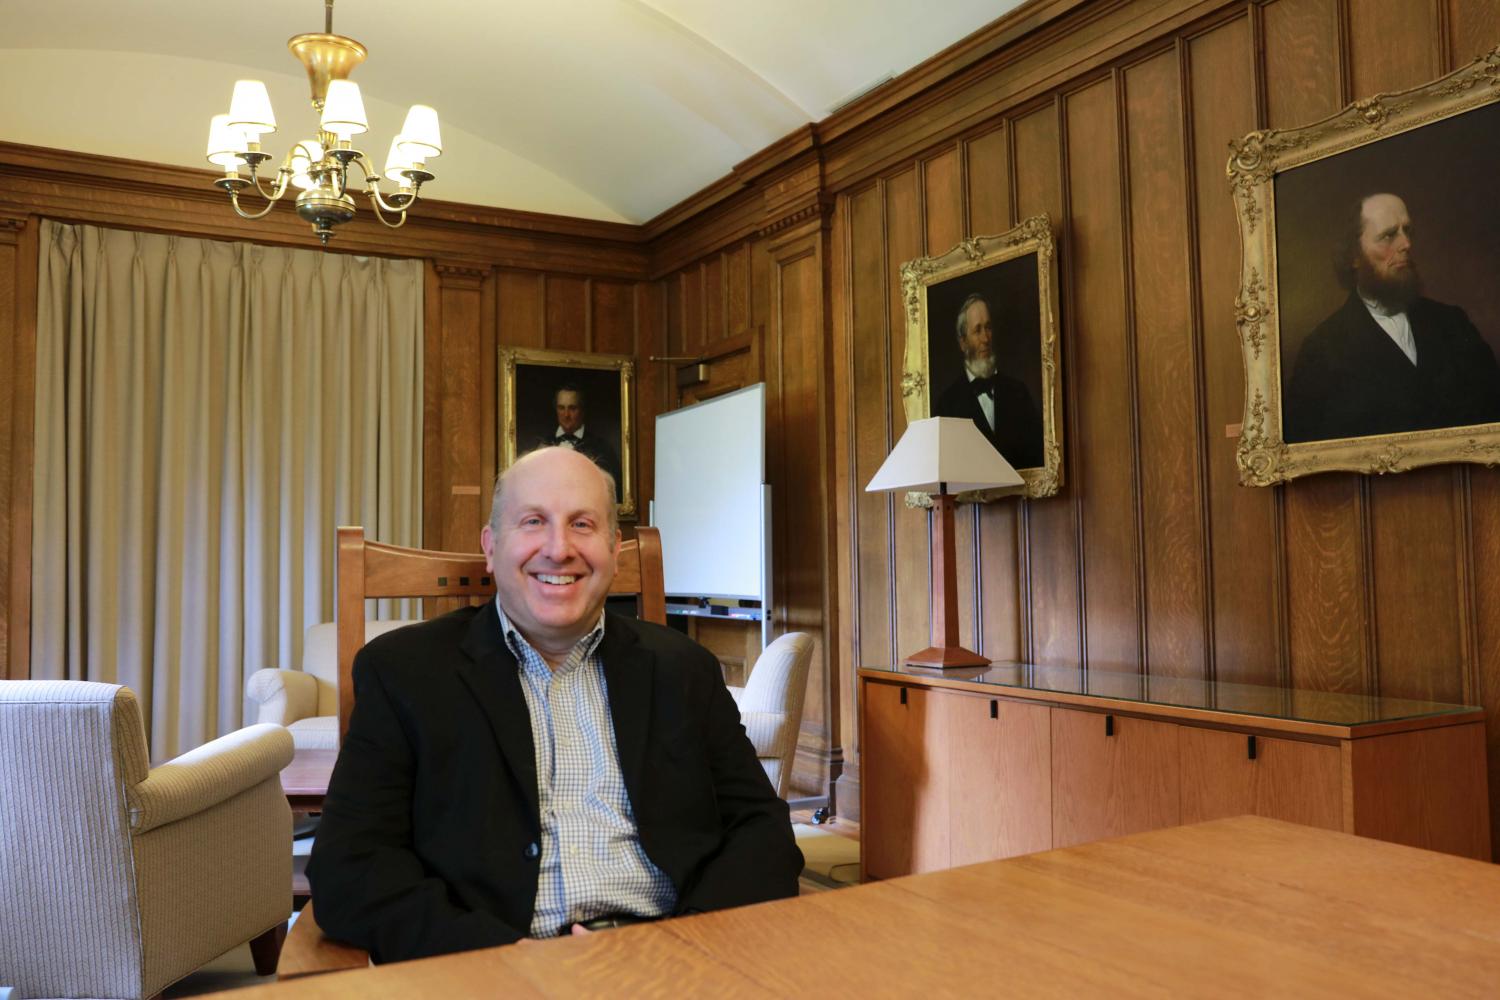 President Marvin Krislov sits in the Cass Gilbert conference room. Krislov departs at the end of this semester after a decade at Oberlin to become president of Pace University this fall.